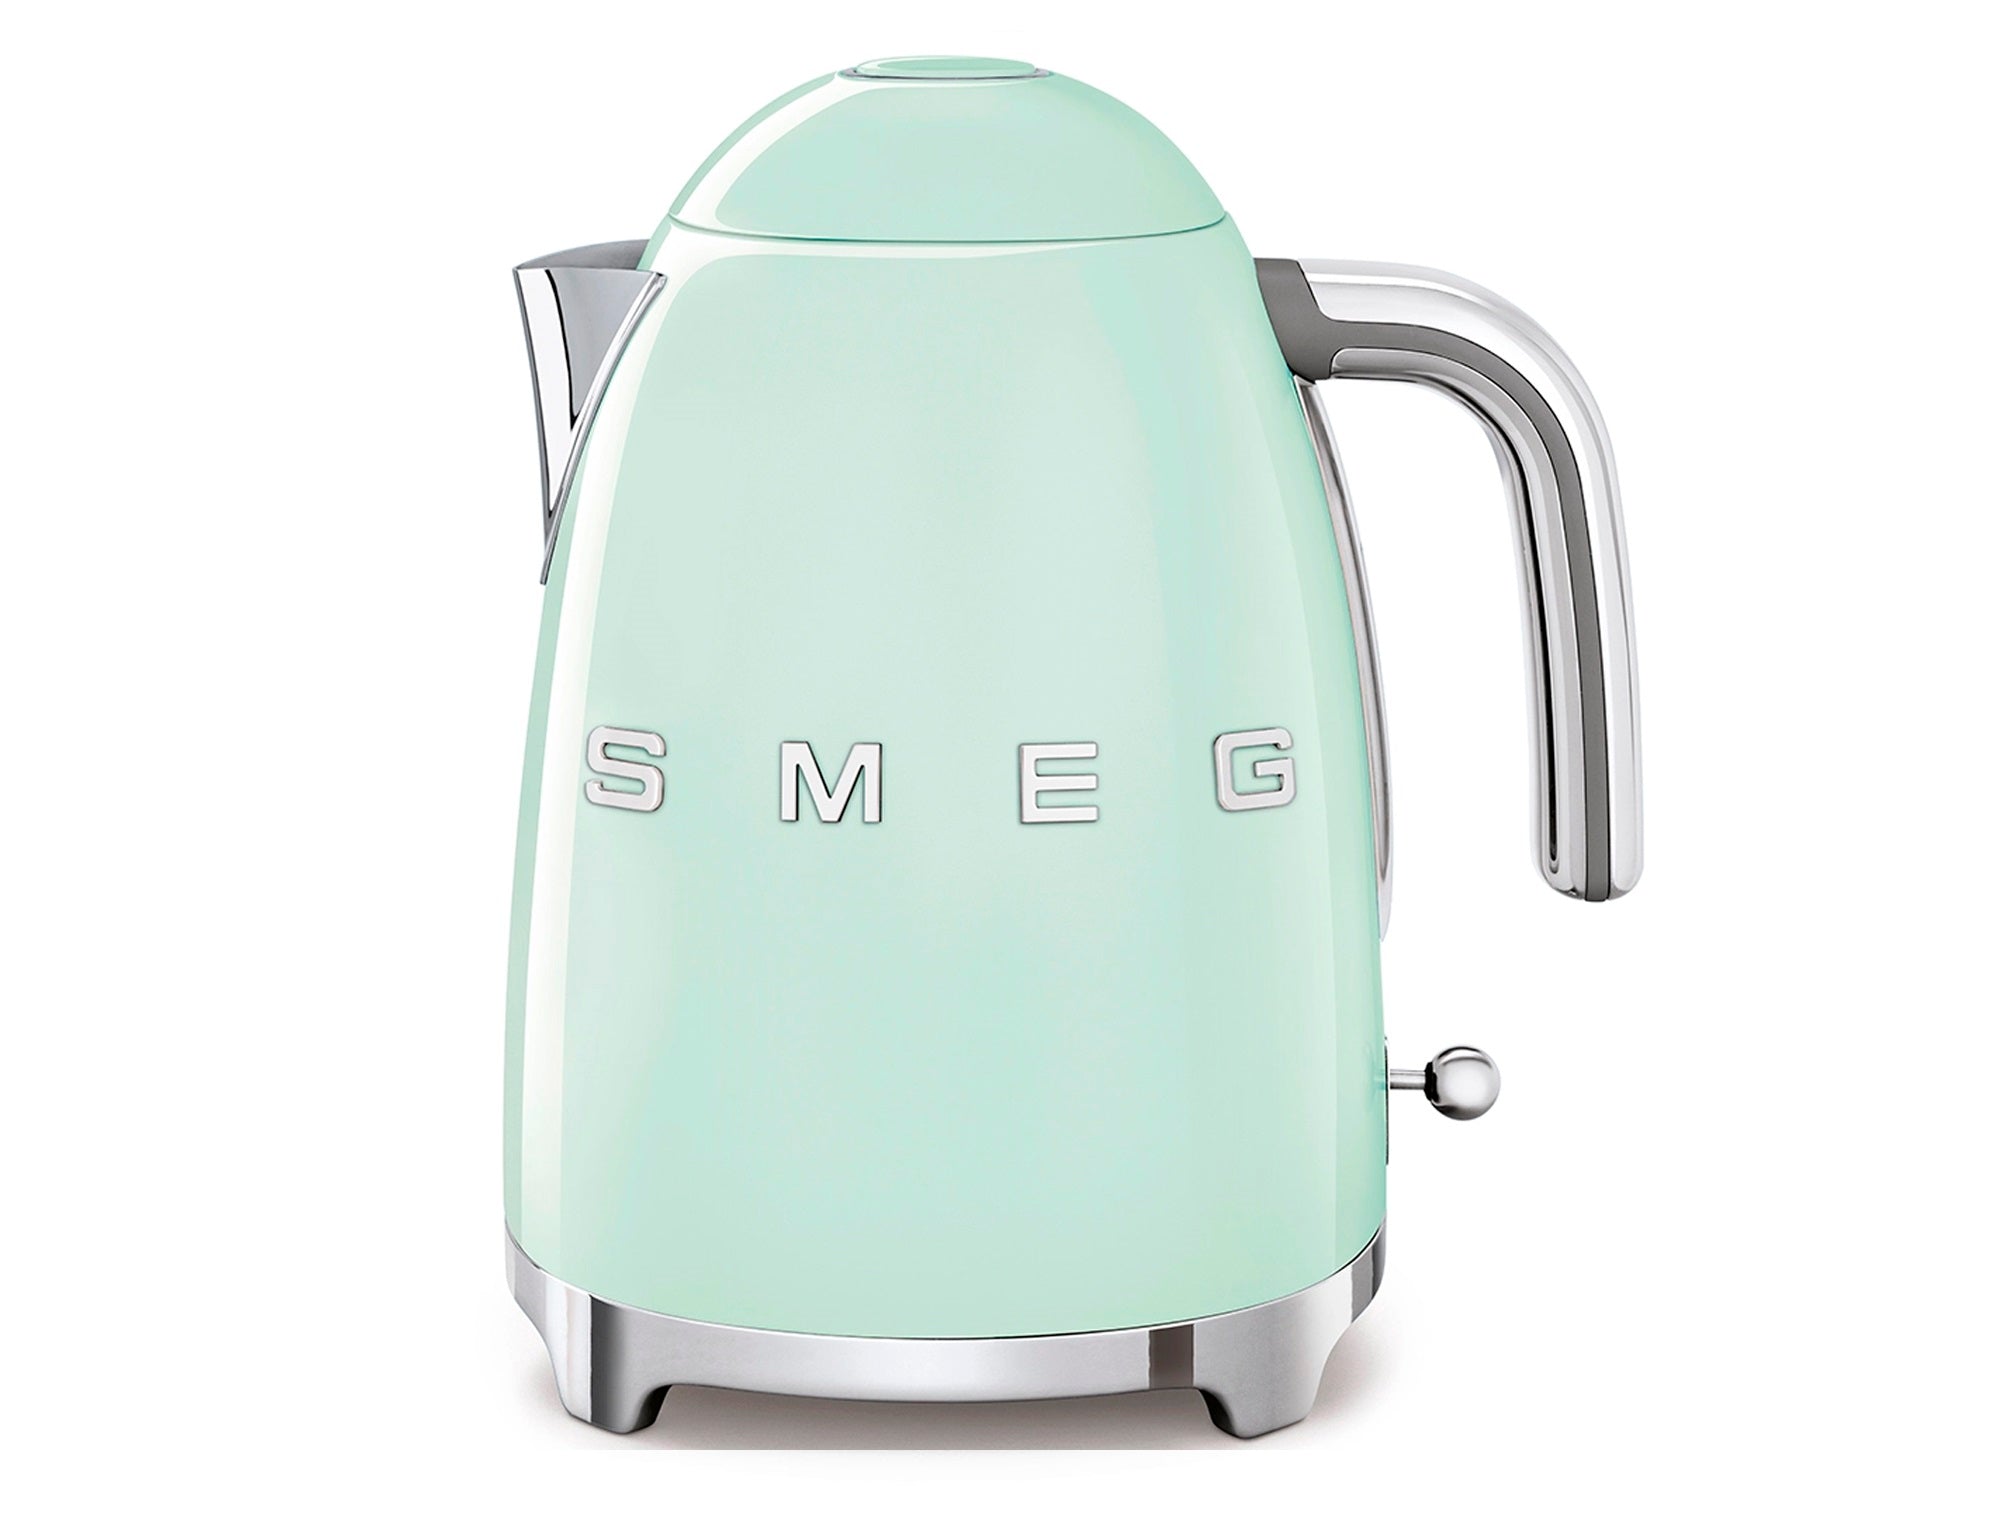 Smeg Electric Kettle 50's Style Aesthetic